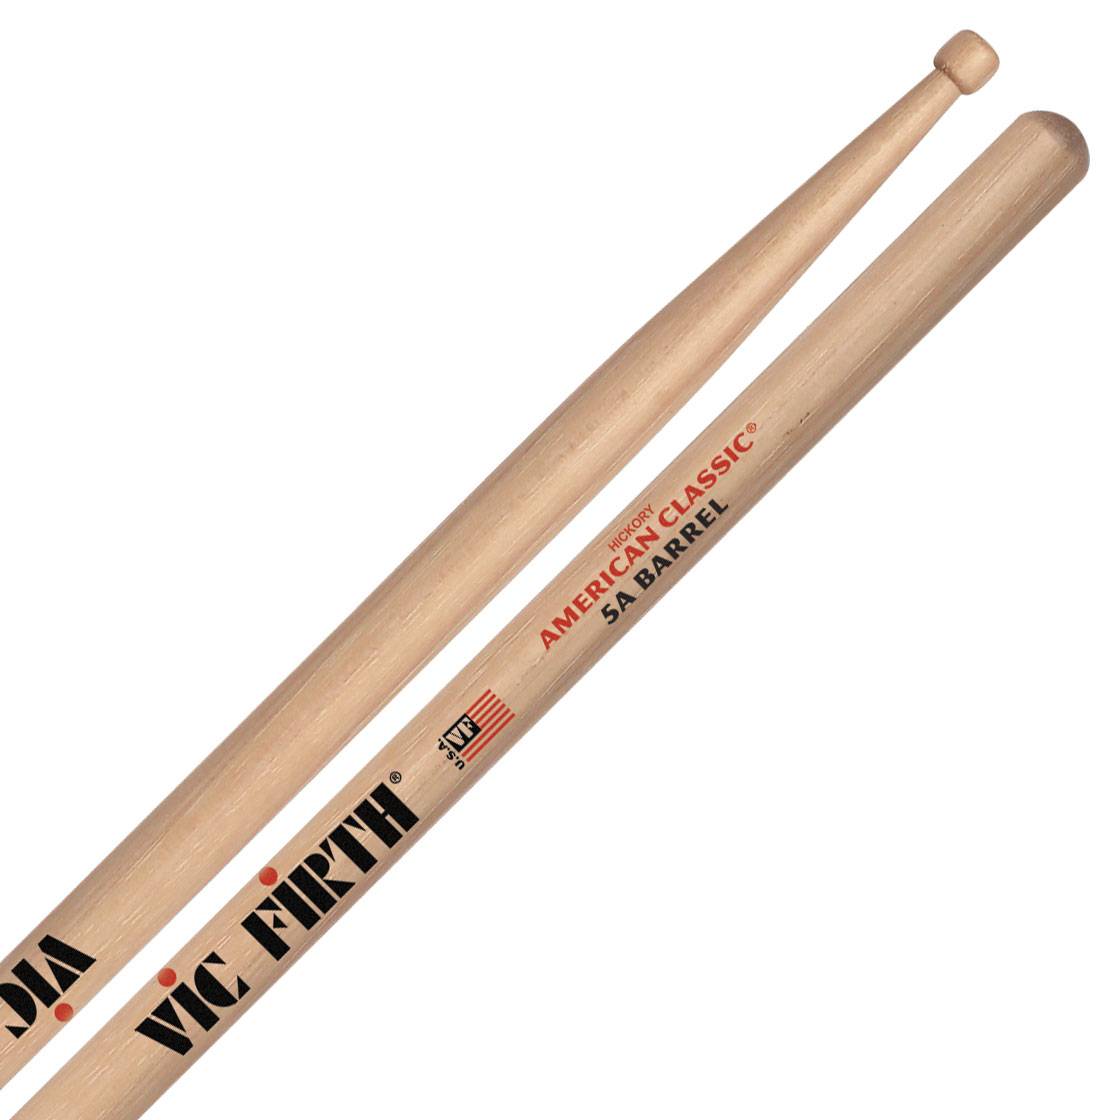 Vic Firth 5A American Classic Hickory Wood Drum Sticks